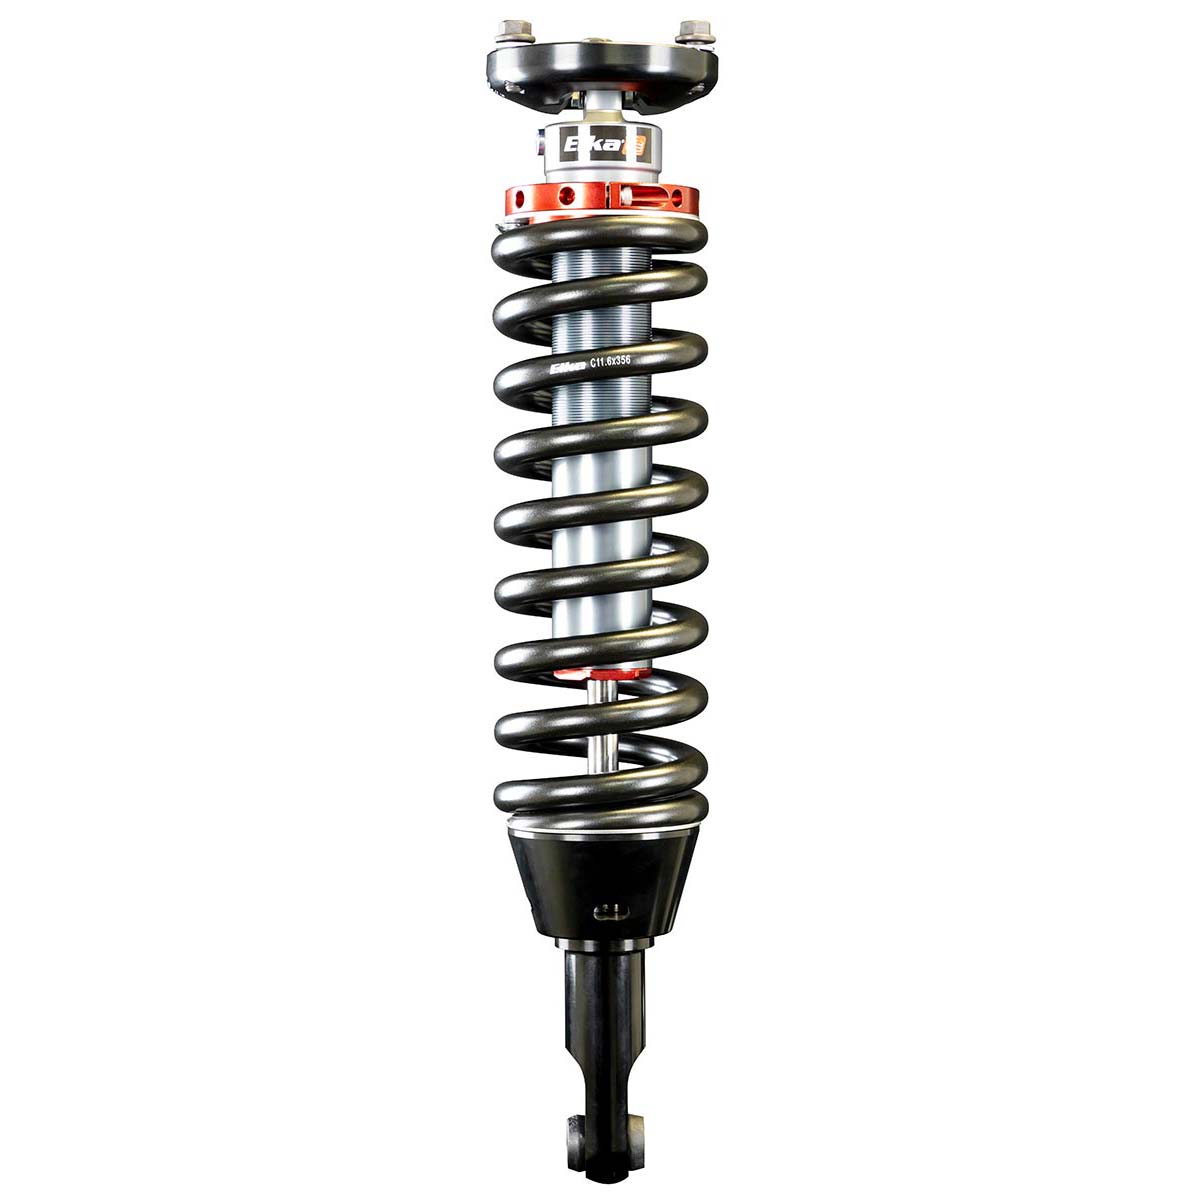 2.0 IFP FRONT SHOCKS for TOYOTA 4RUNNER, 1996 to 2002 (0 in. to 3 in. lift) - RA Motorsports Canada